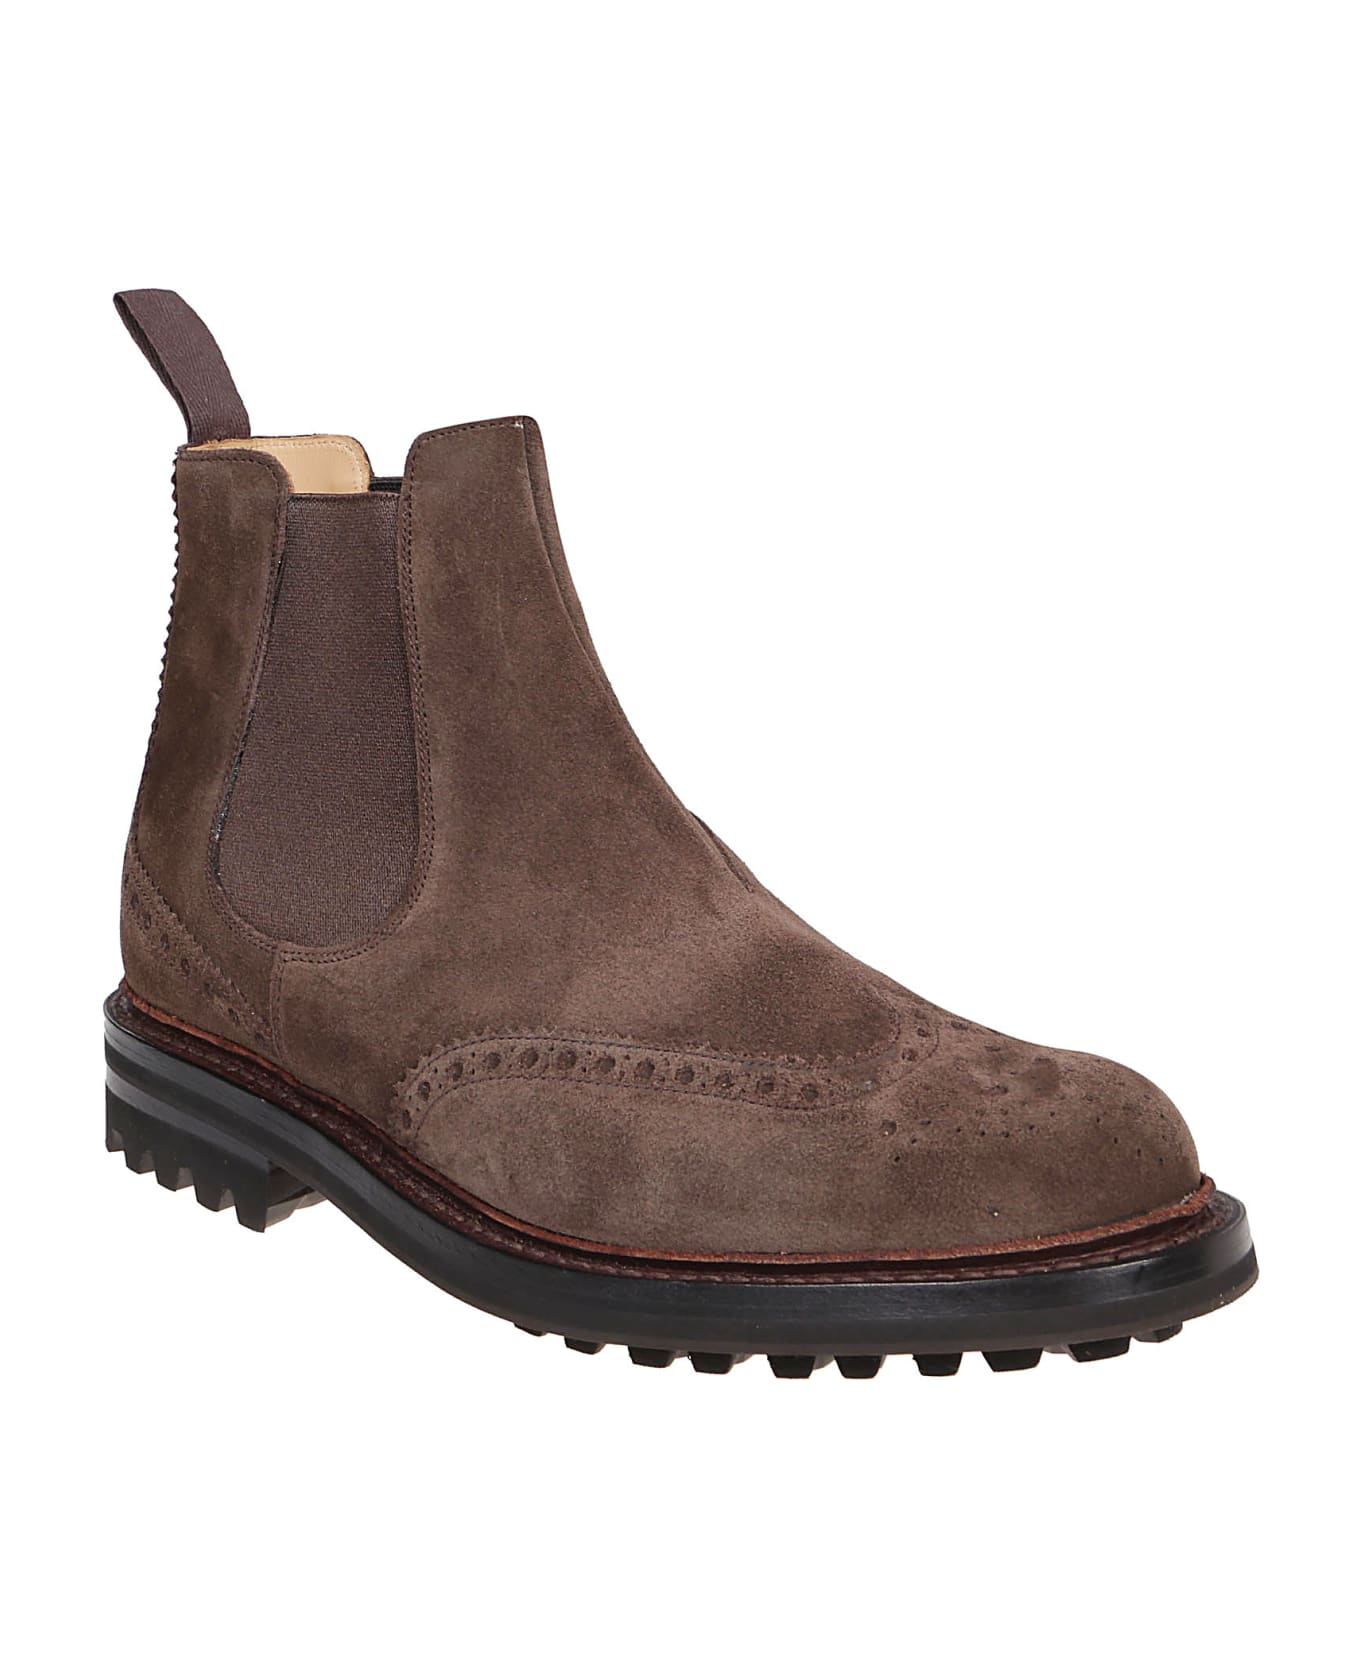 Church's Ankle Boots Mc Entyre Lw - Aad Brown